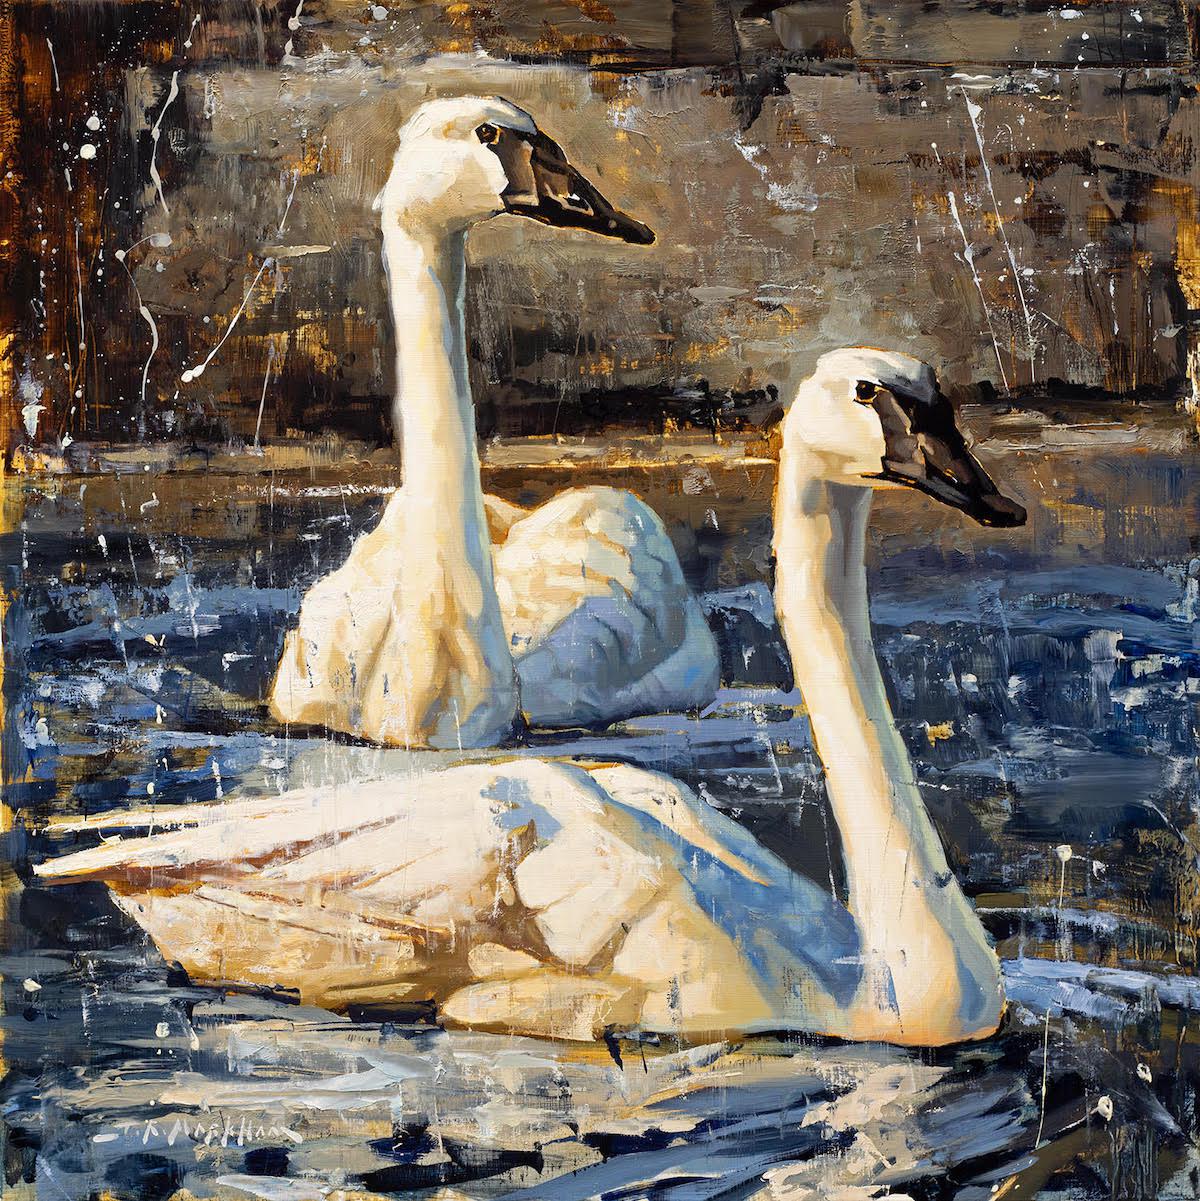 Untitled Swans-Painting-Jerry Markham-Sorrel Sky Gallery